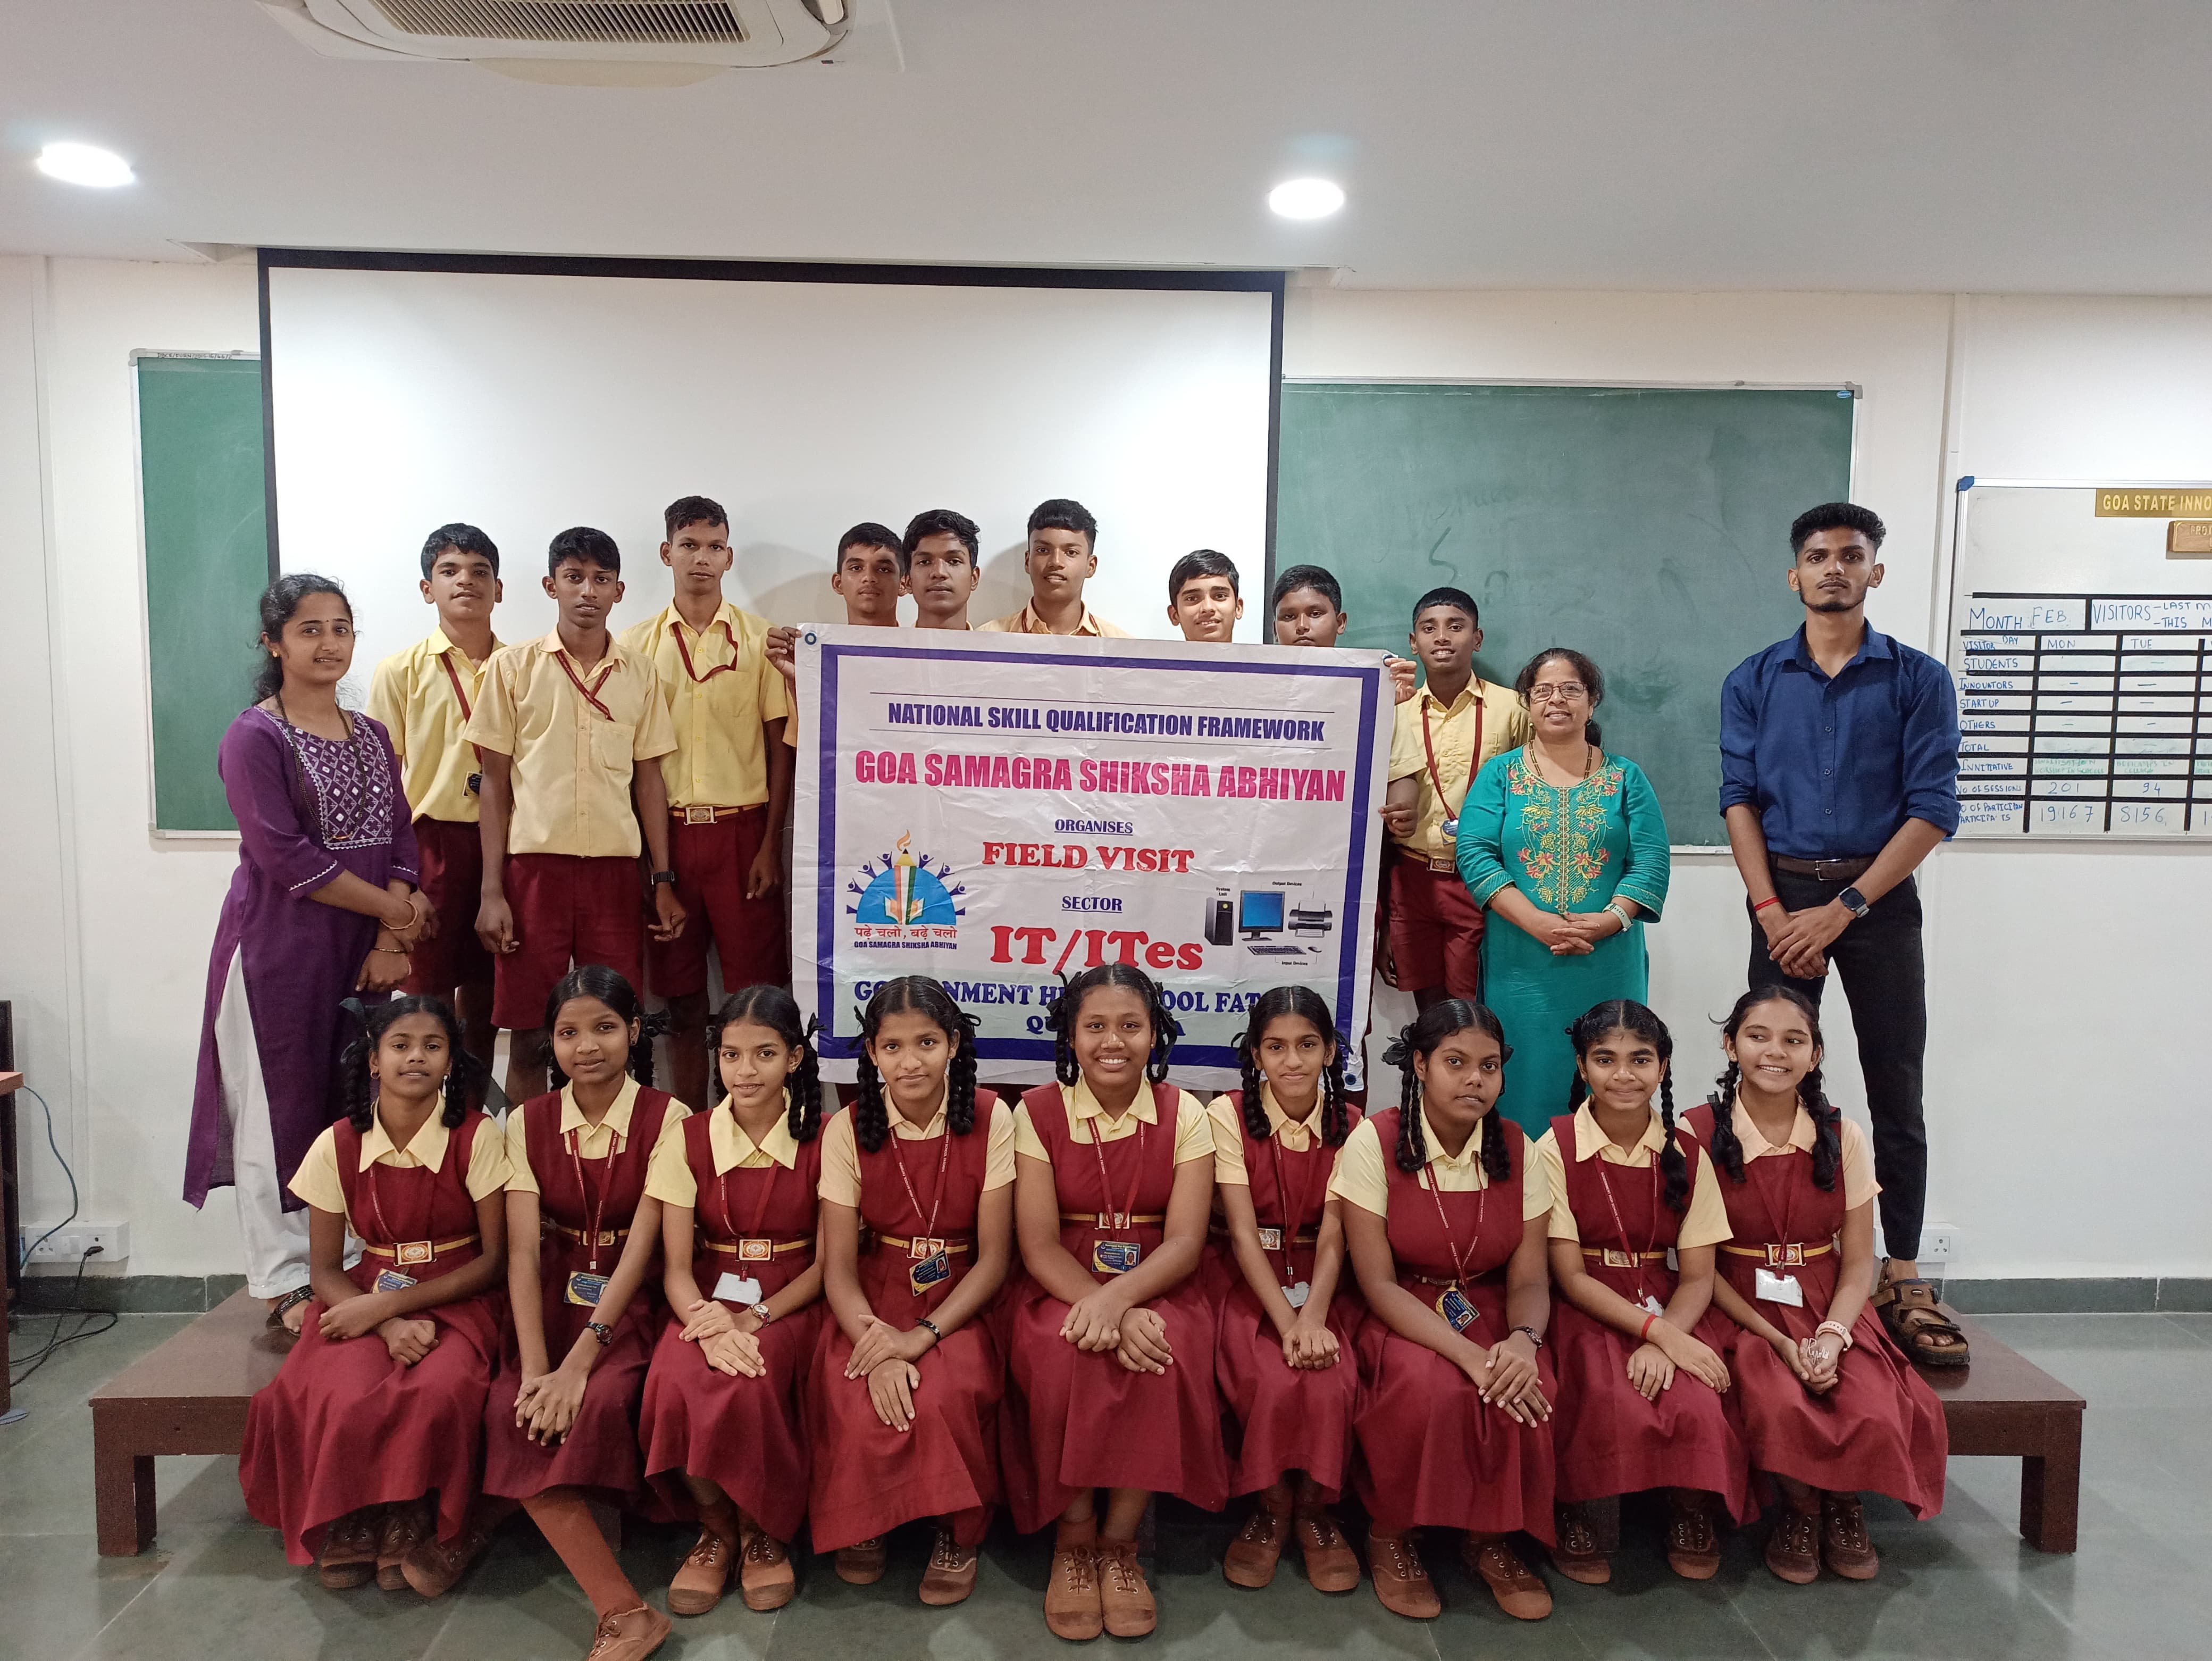 Think Design and Prototyping session and Workshop on Robotics for the students of Govt High School, Fatarpa-Goa.